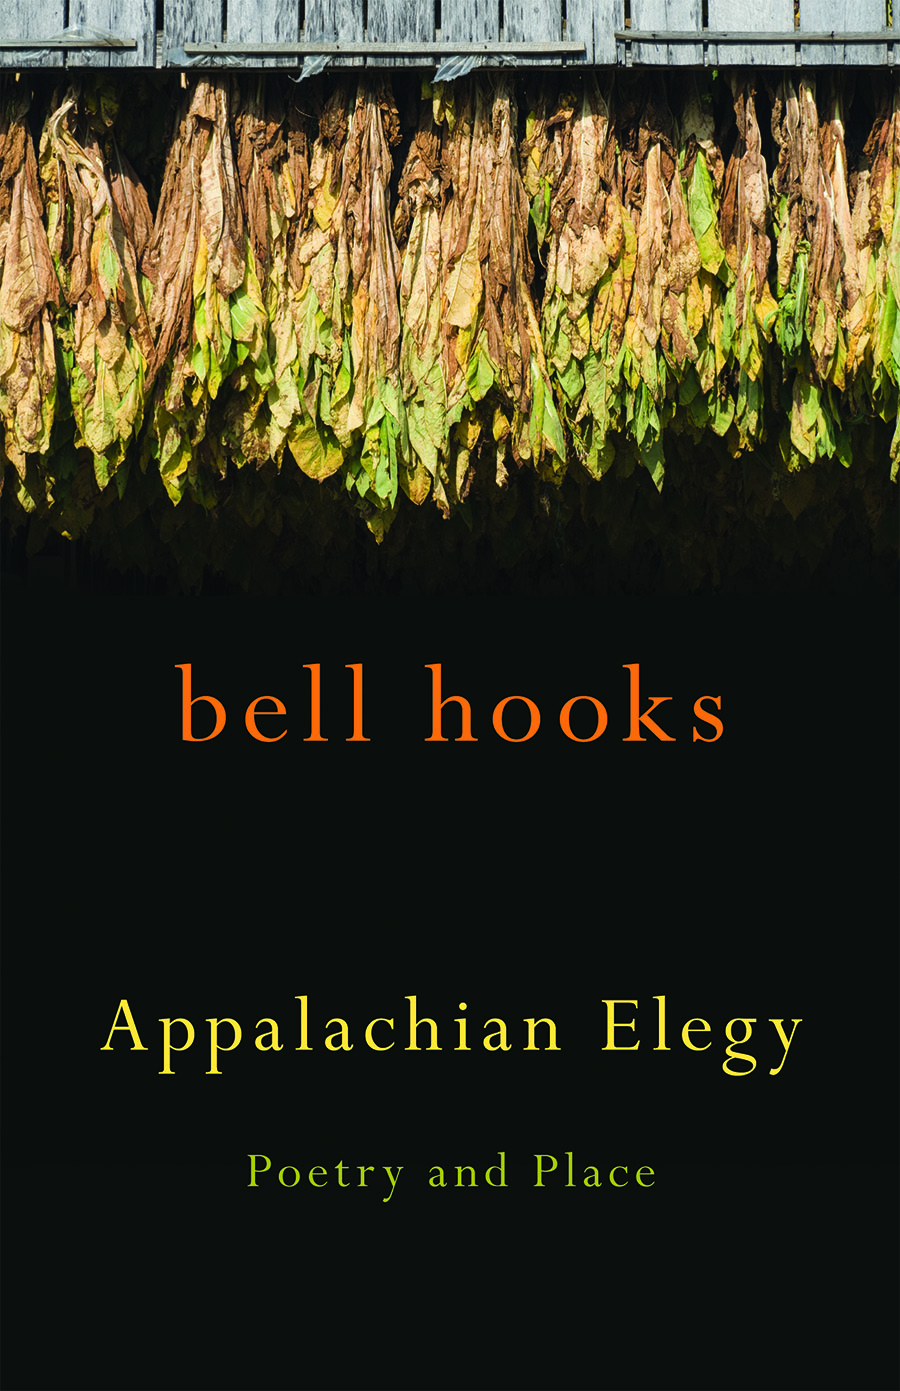 University Press of Kentucky (UPK) author bell hooks has been named the recipient of the 2013 Black Caucus of the American Library Association’s (BCALA) Best Poetry Award for her book "Appalachian Elegy: Poetry and Place."